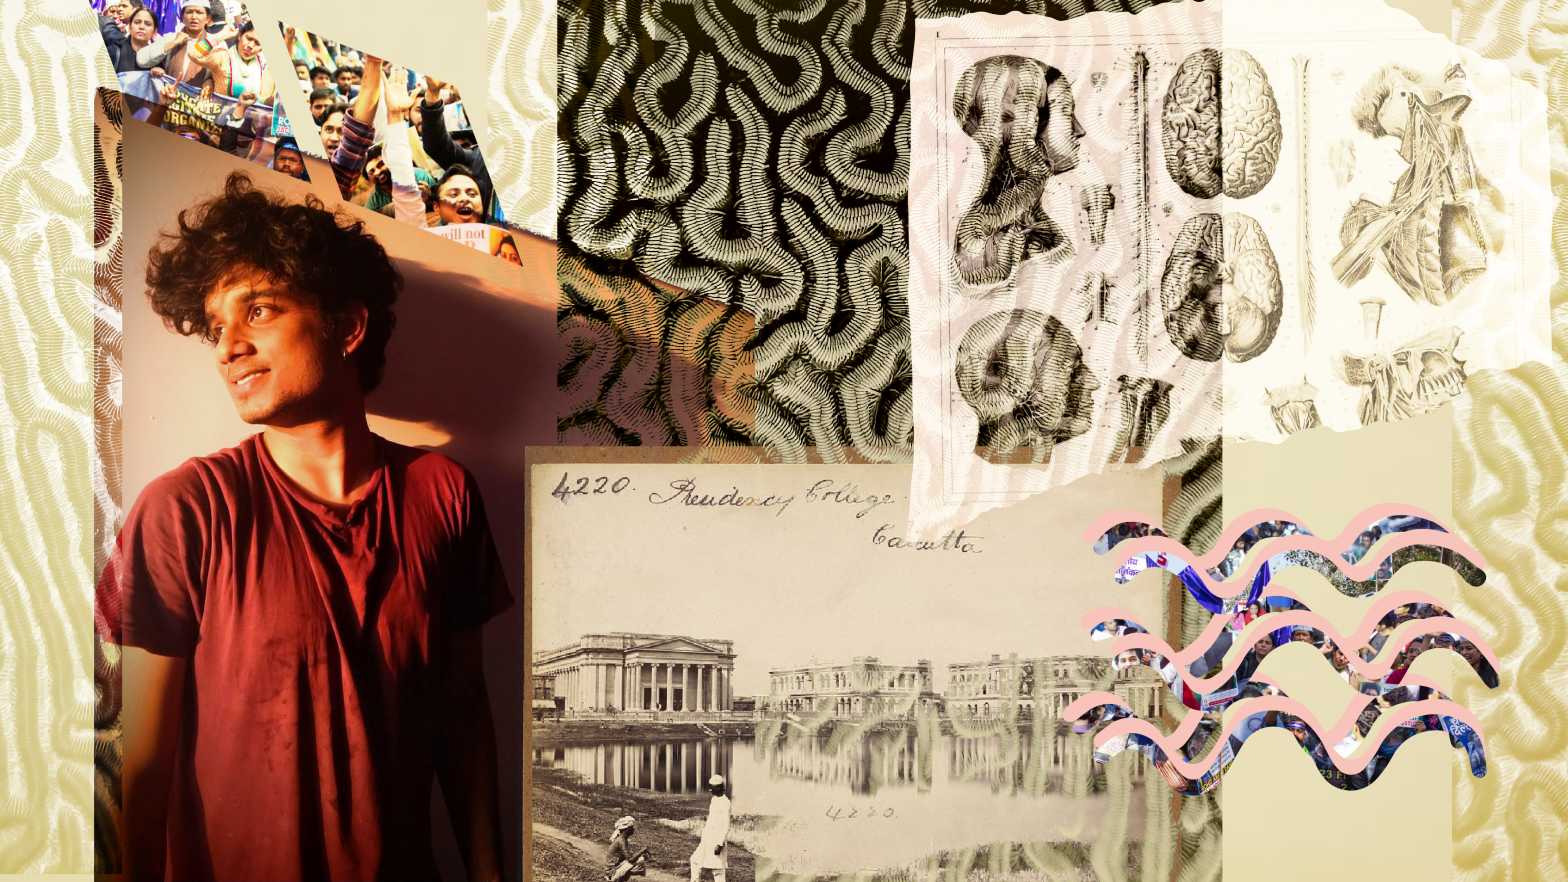 Decorative collage. On the left, Sayantan Datta dreamily looks off into the distance. In the center, a drawing of brain coral and an old postcard of Presidency College, Calcutta. On the right, historical images of the brain. Small clippings of protest photos are scattered throughout the collage.